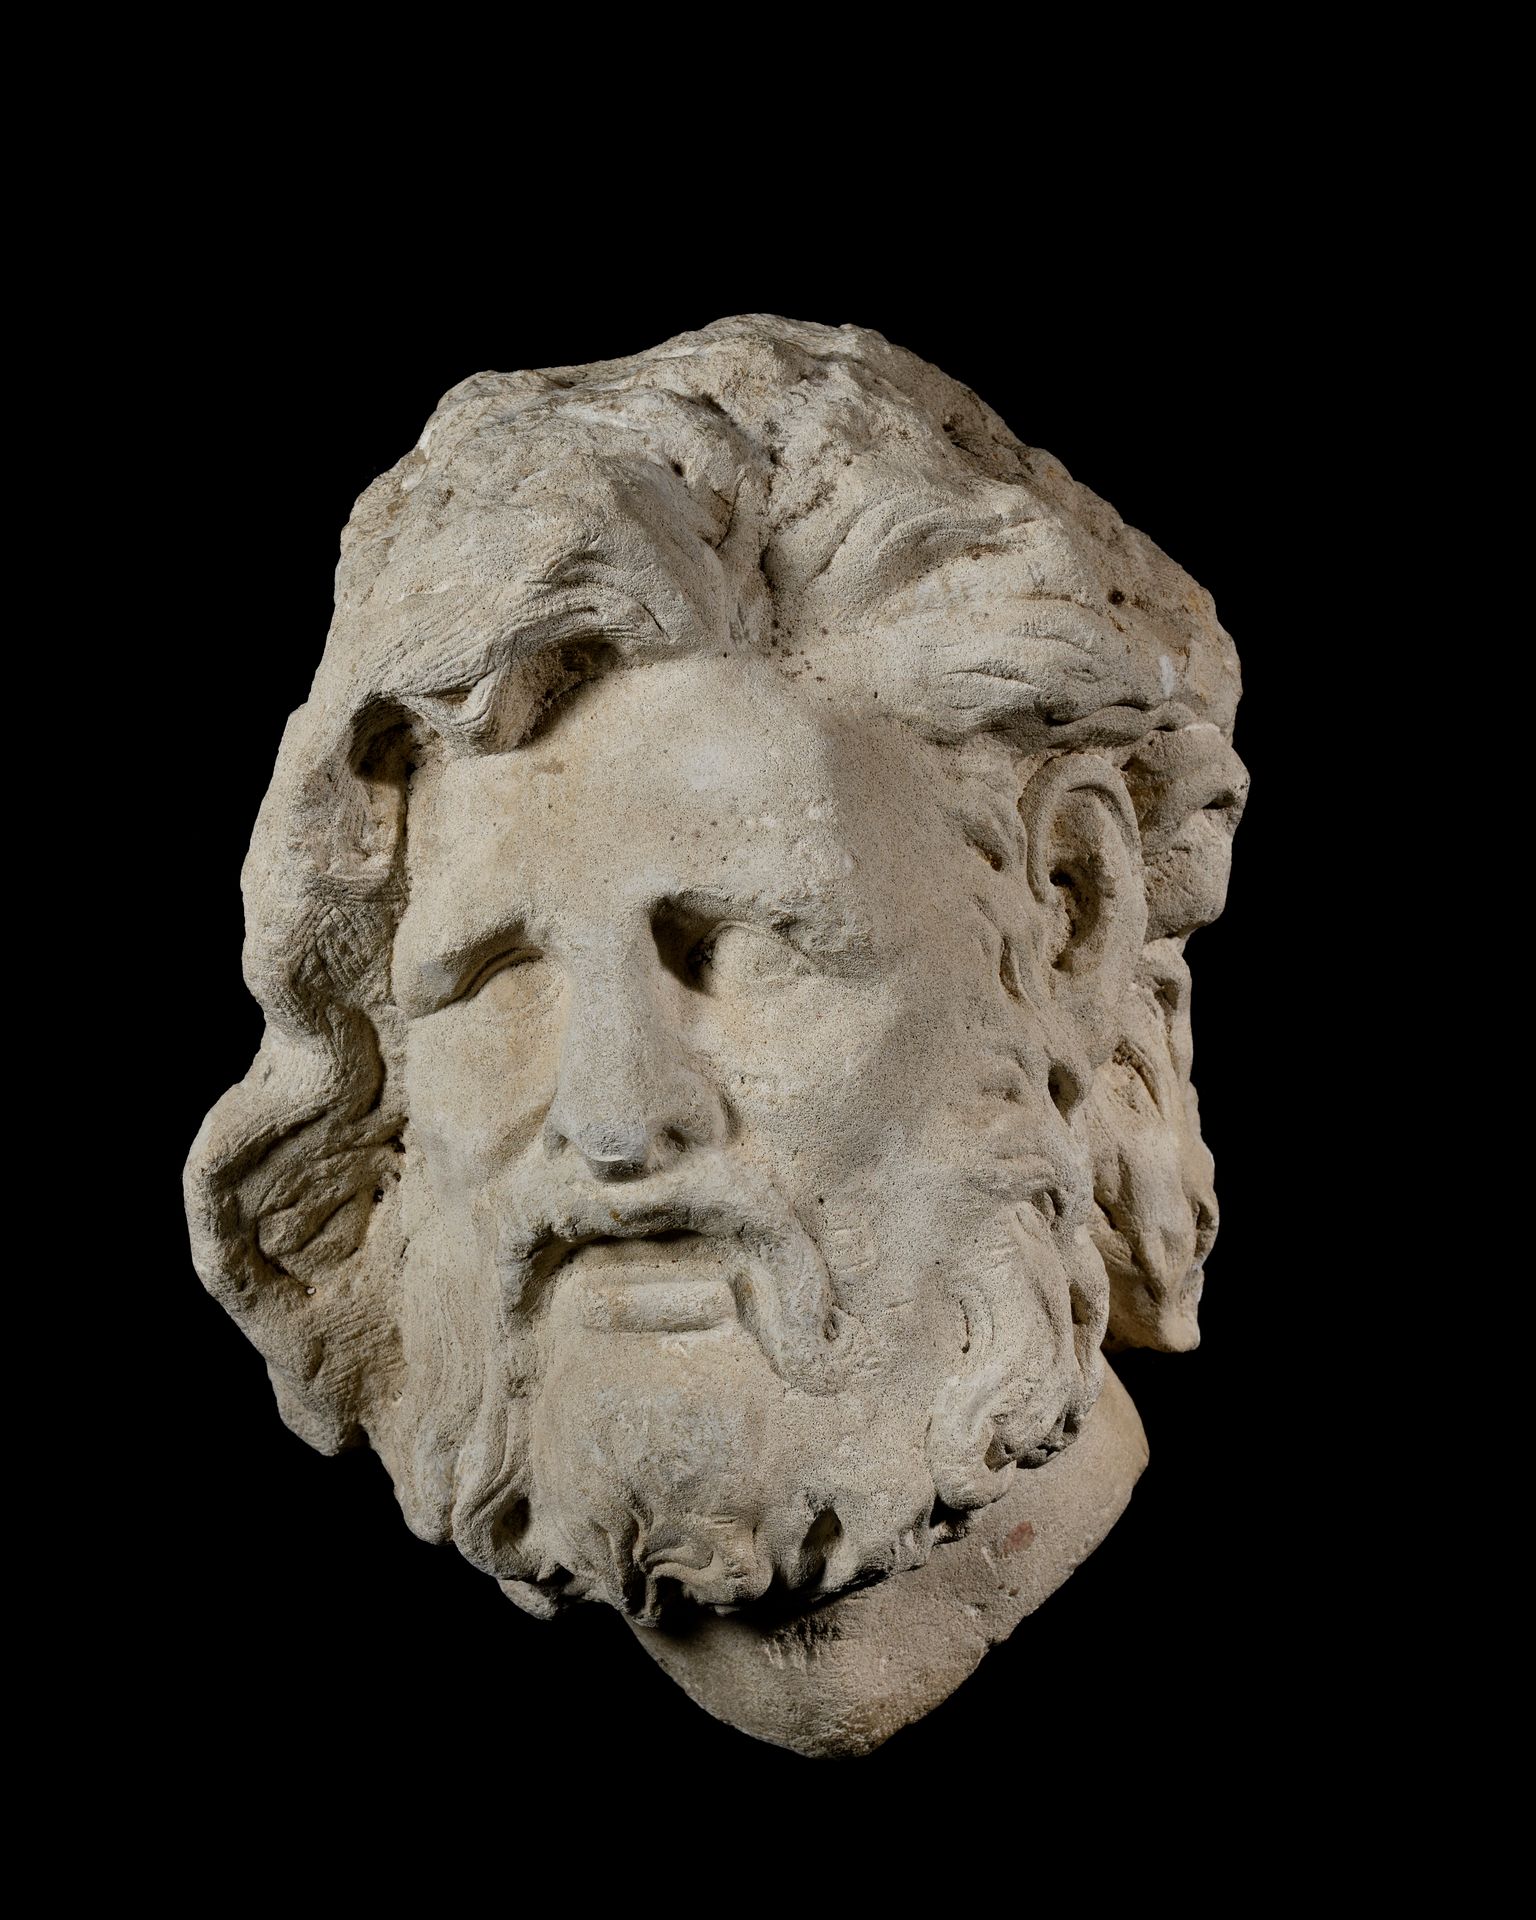 Null FRENCH SCHOOL, late 18th, early 19th century
Head of a bearded man
Carved l&hellip;